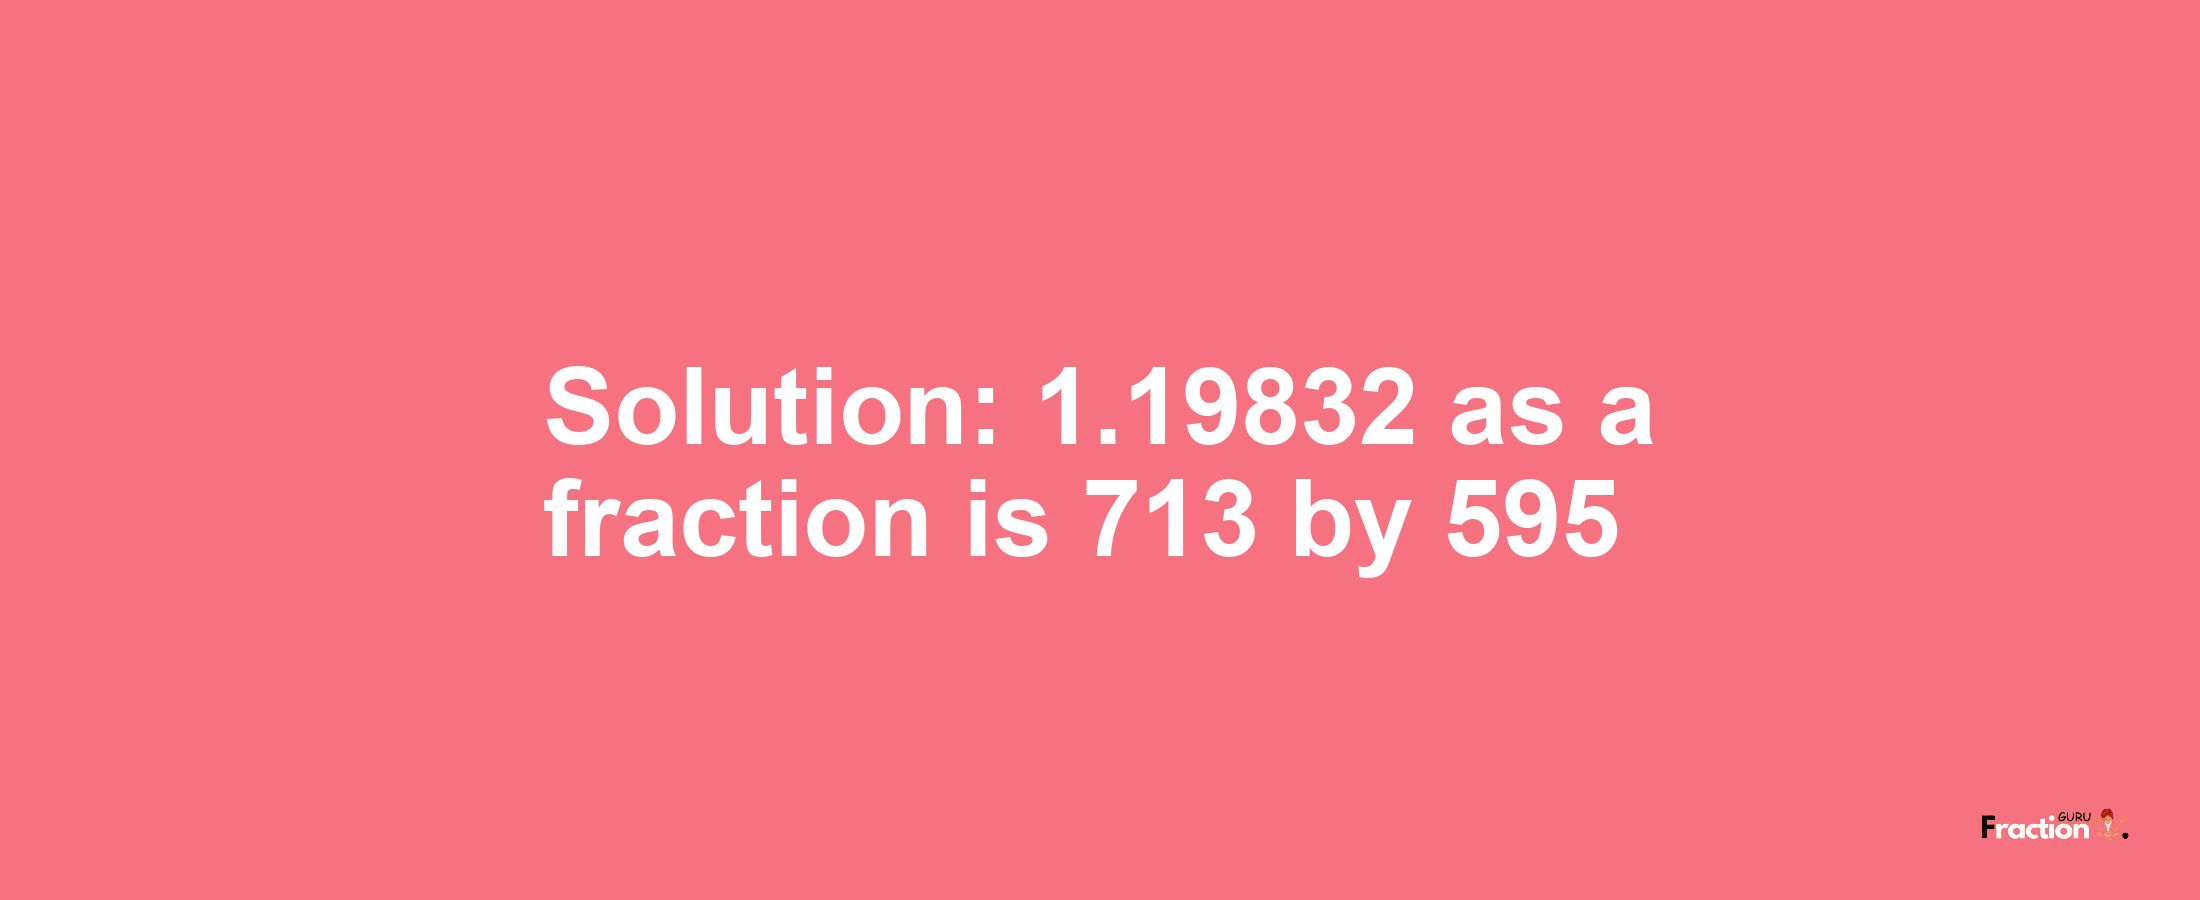 Solution:1.19832 as a fraction is 713/595